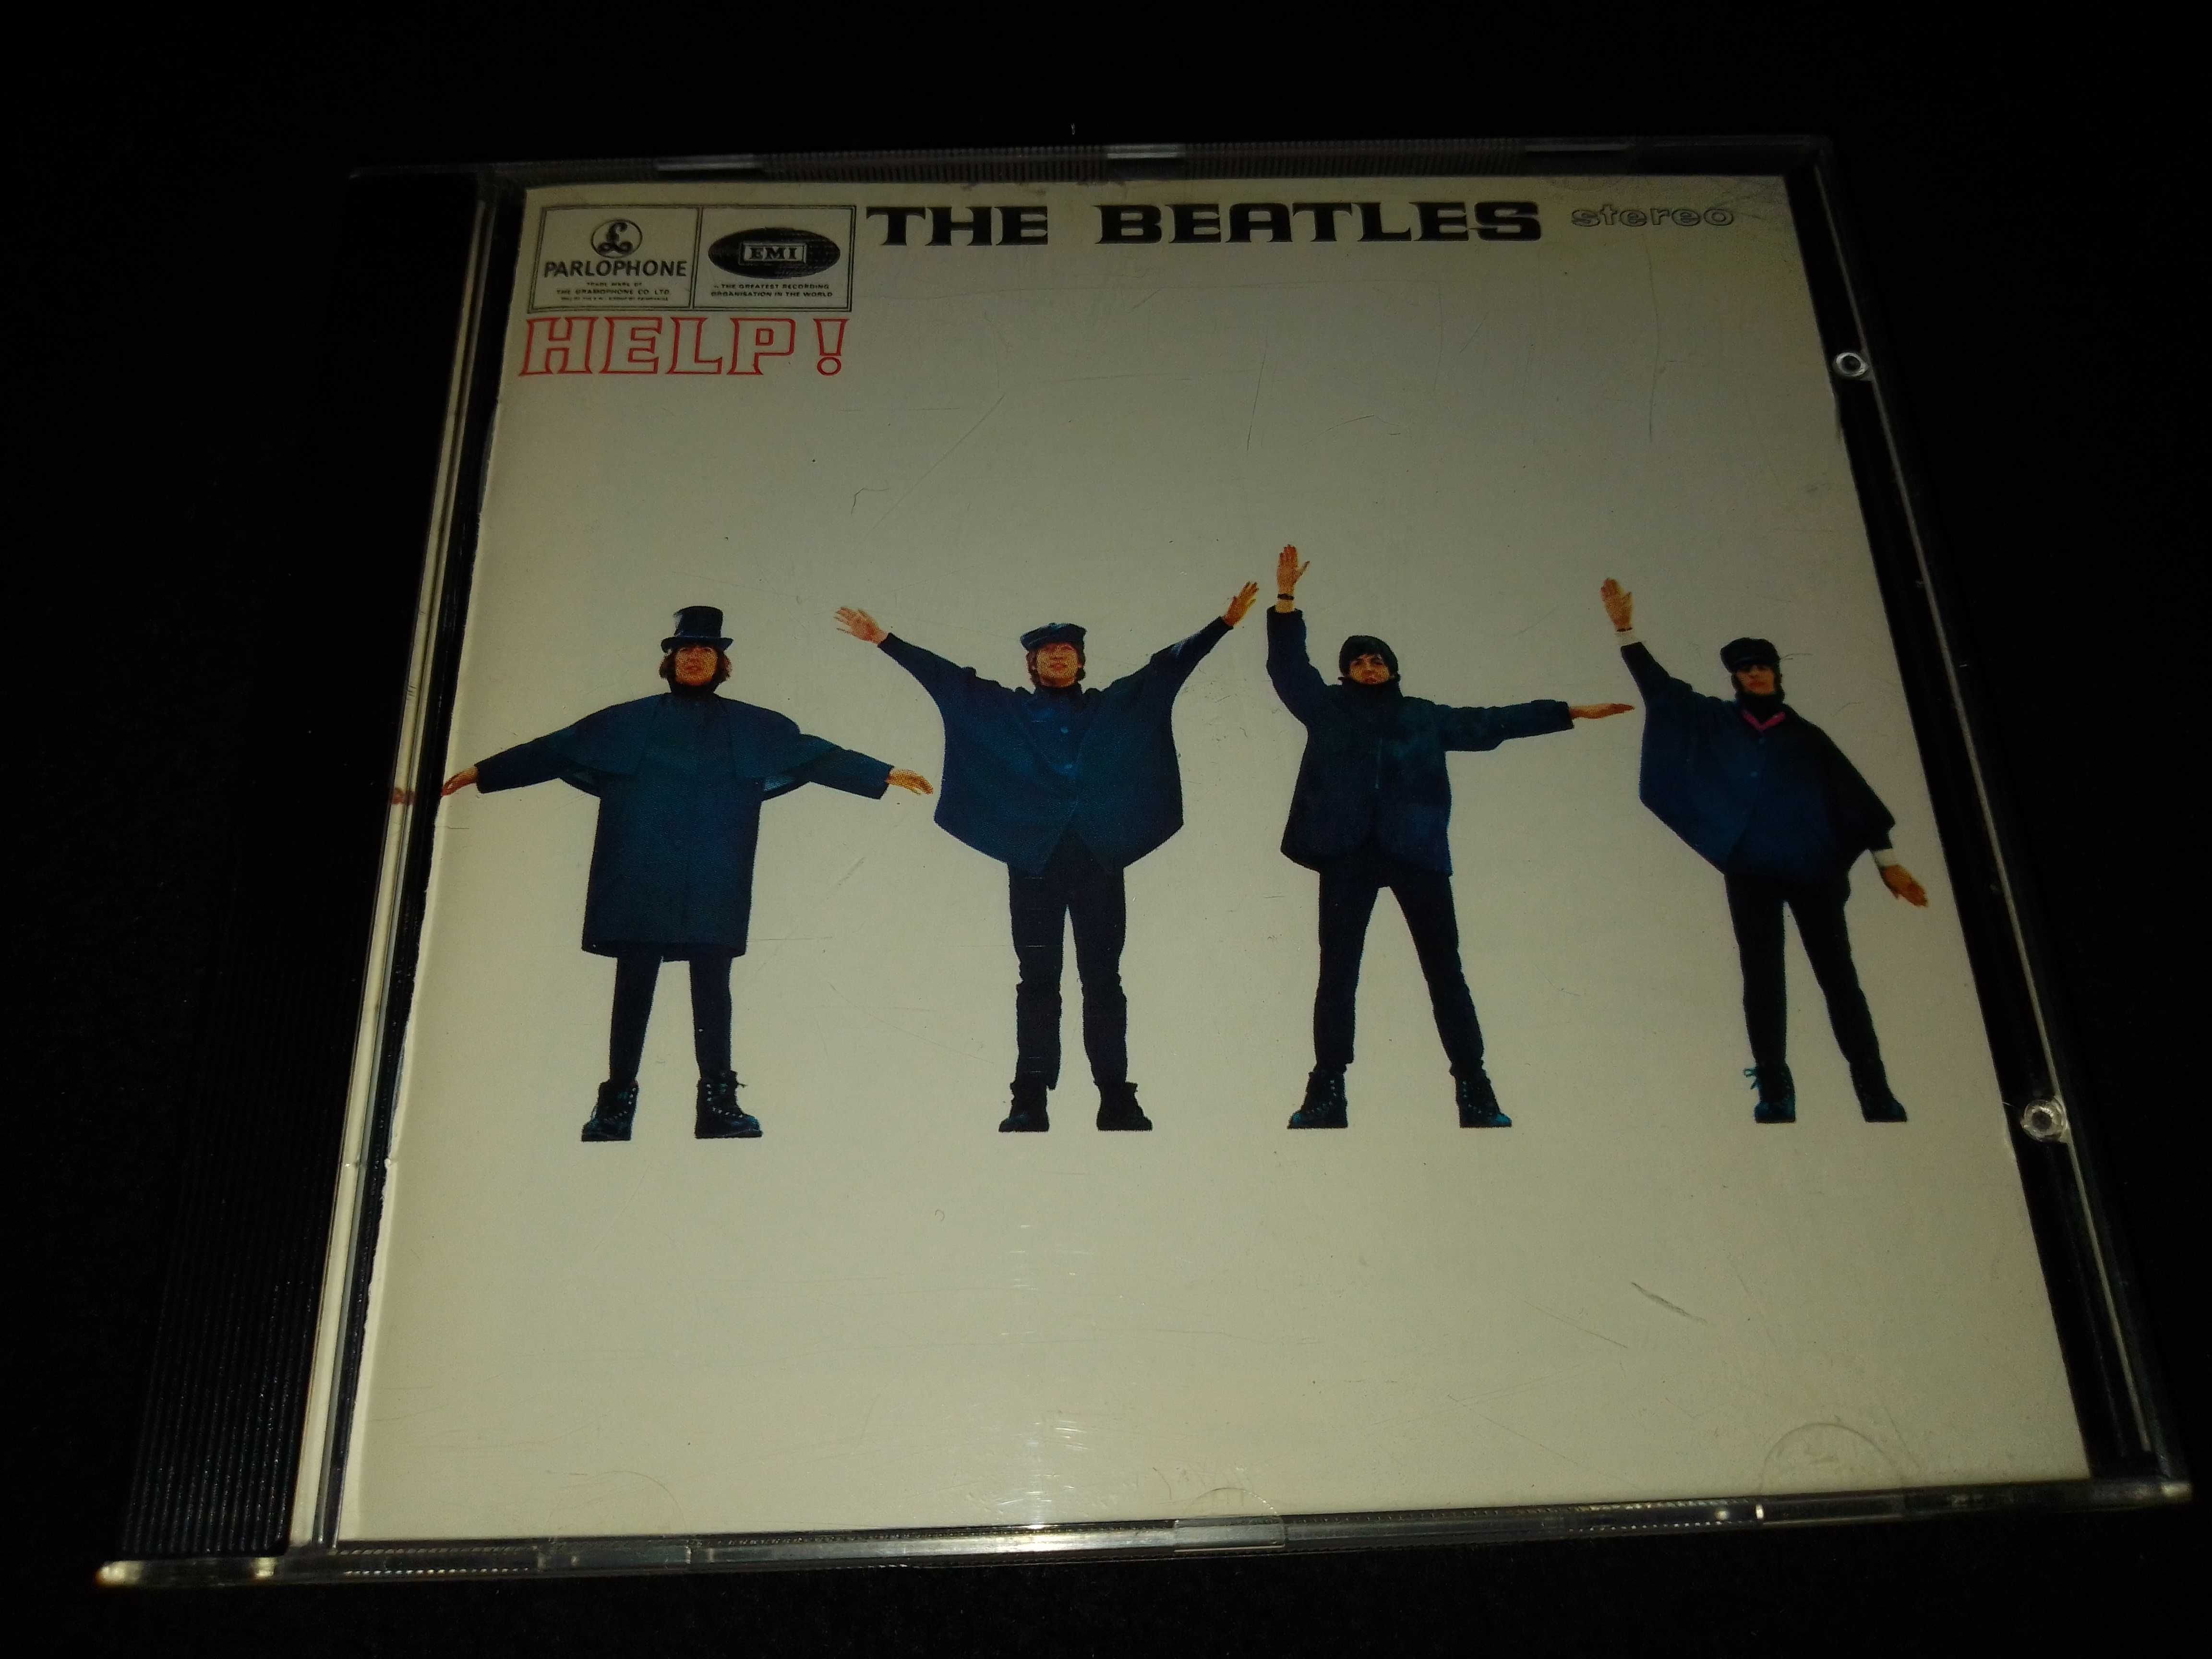 The Beatles "Live At The BBC" фирменный 2хCD Made In Holland.